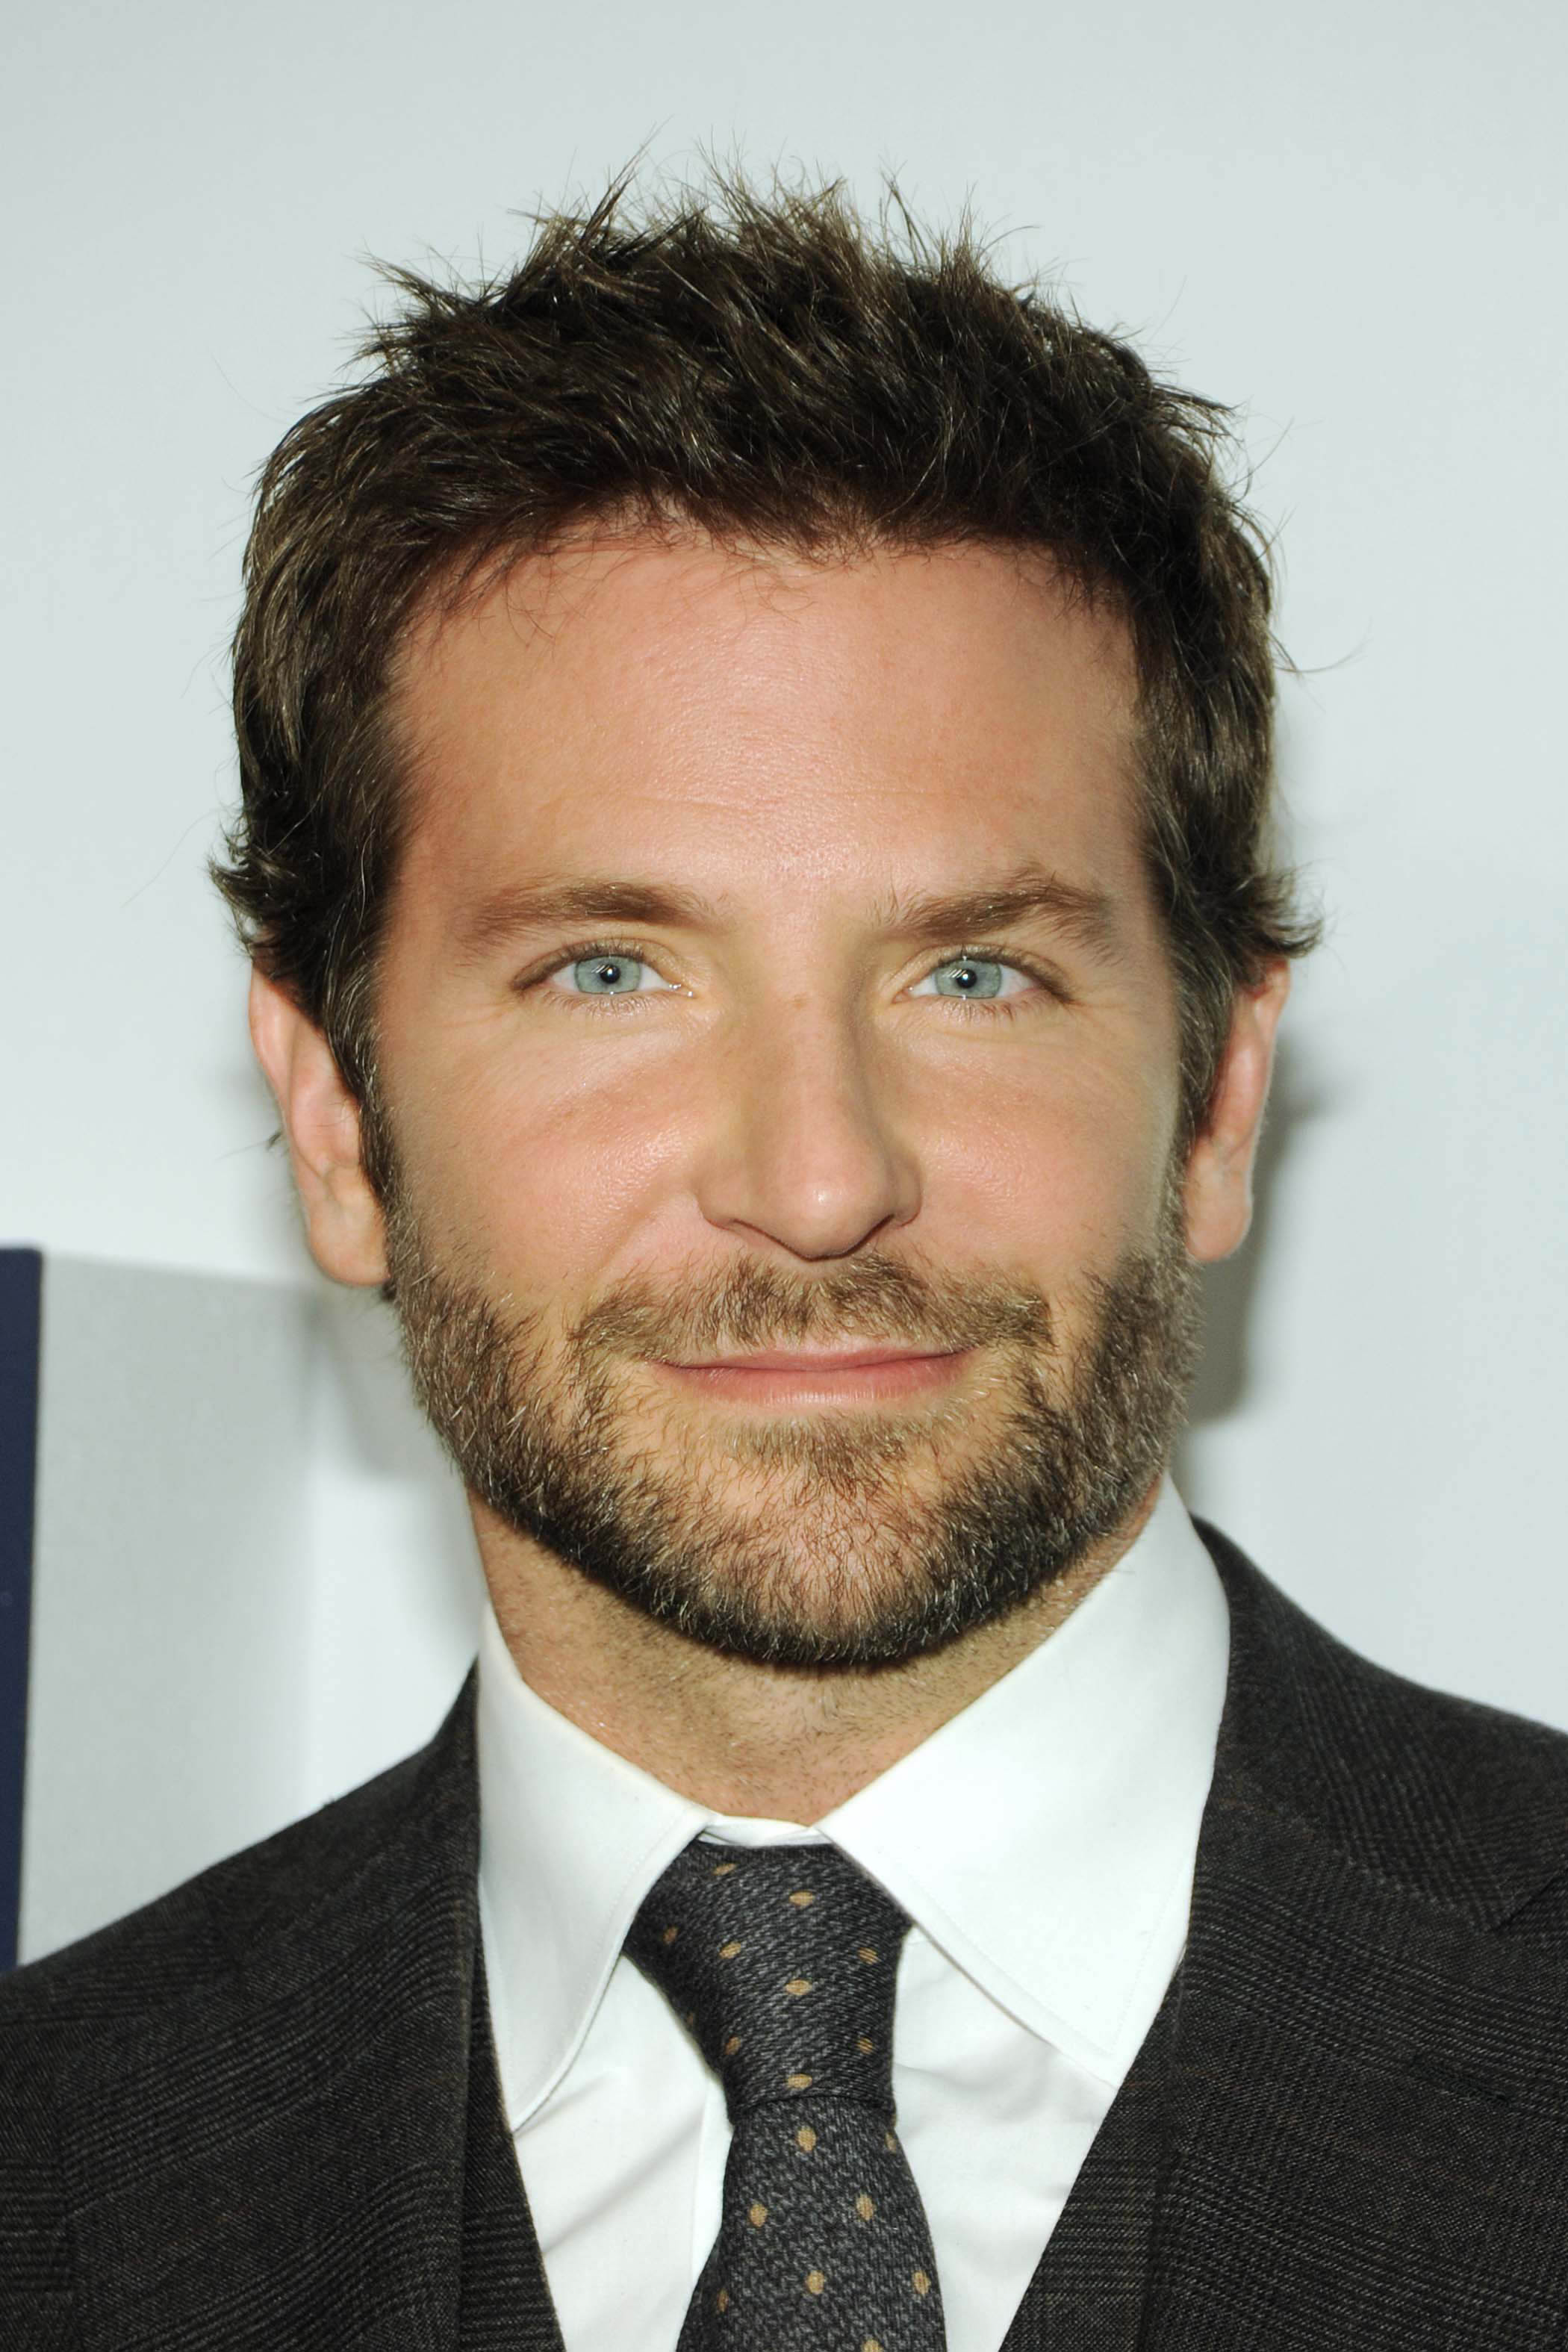 Bradley Cooper to Make Directorial Debut With 'A Star Is Born